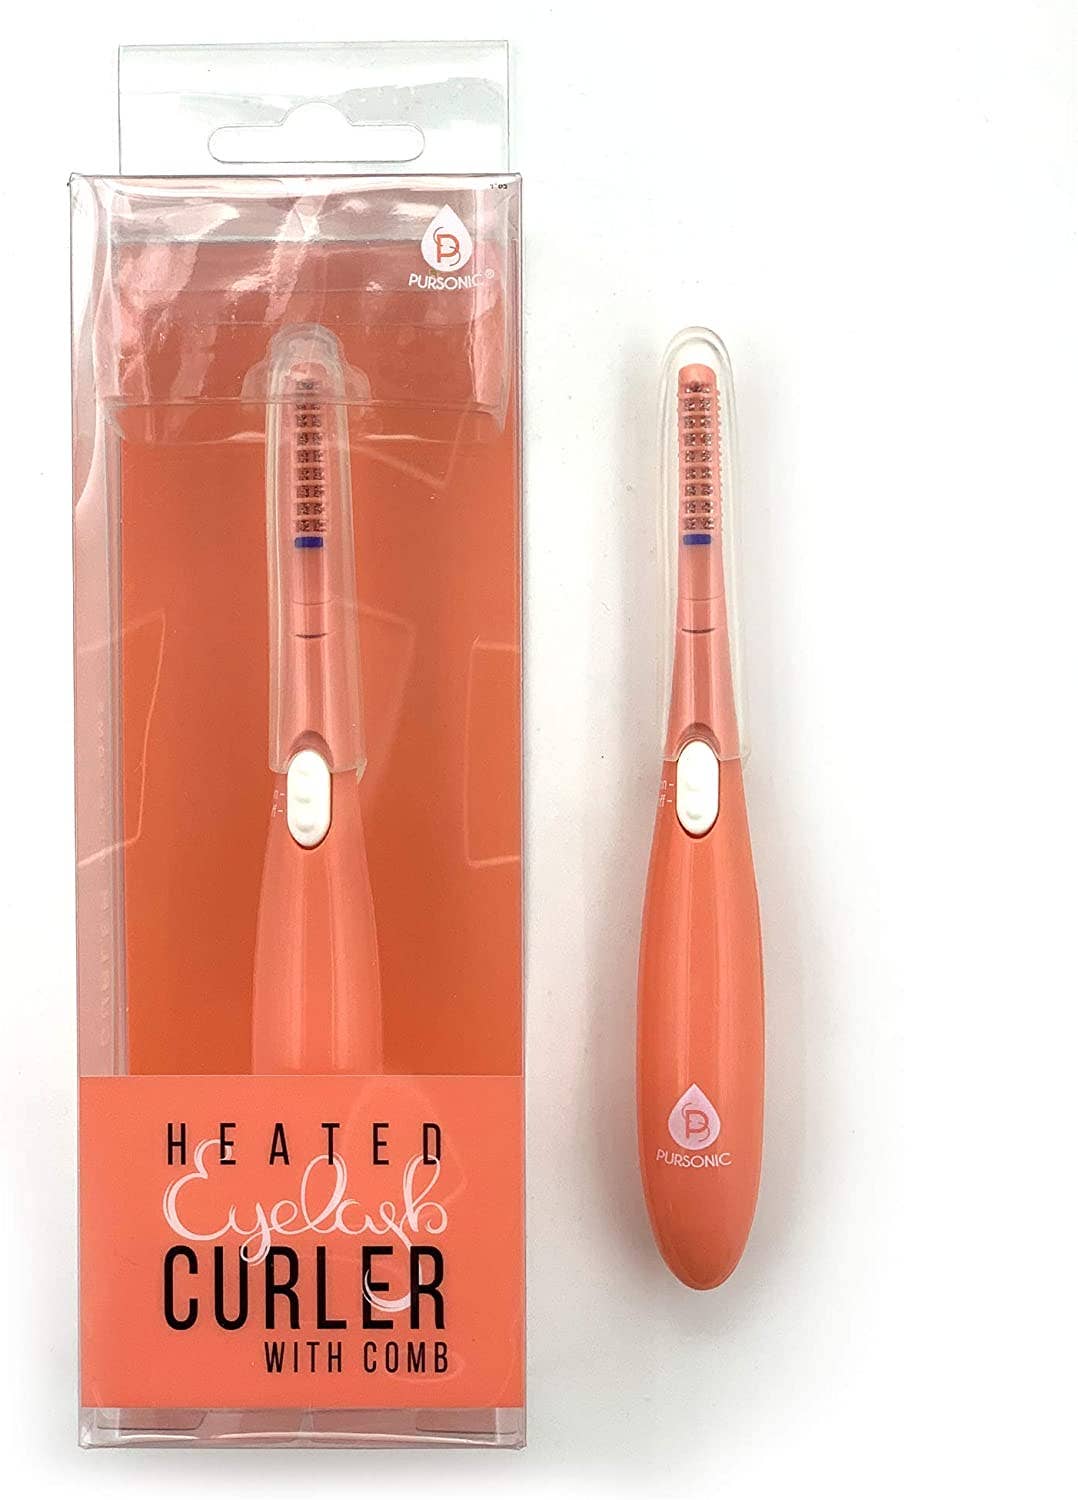 Heated Eyelash Curler with comb